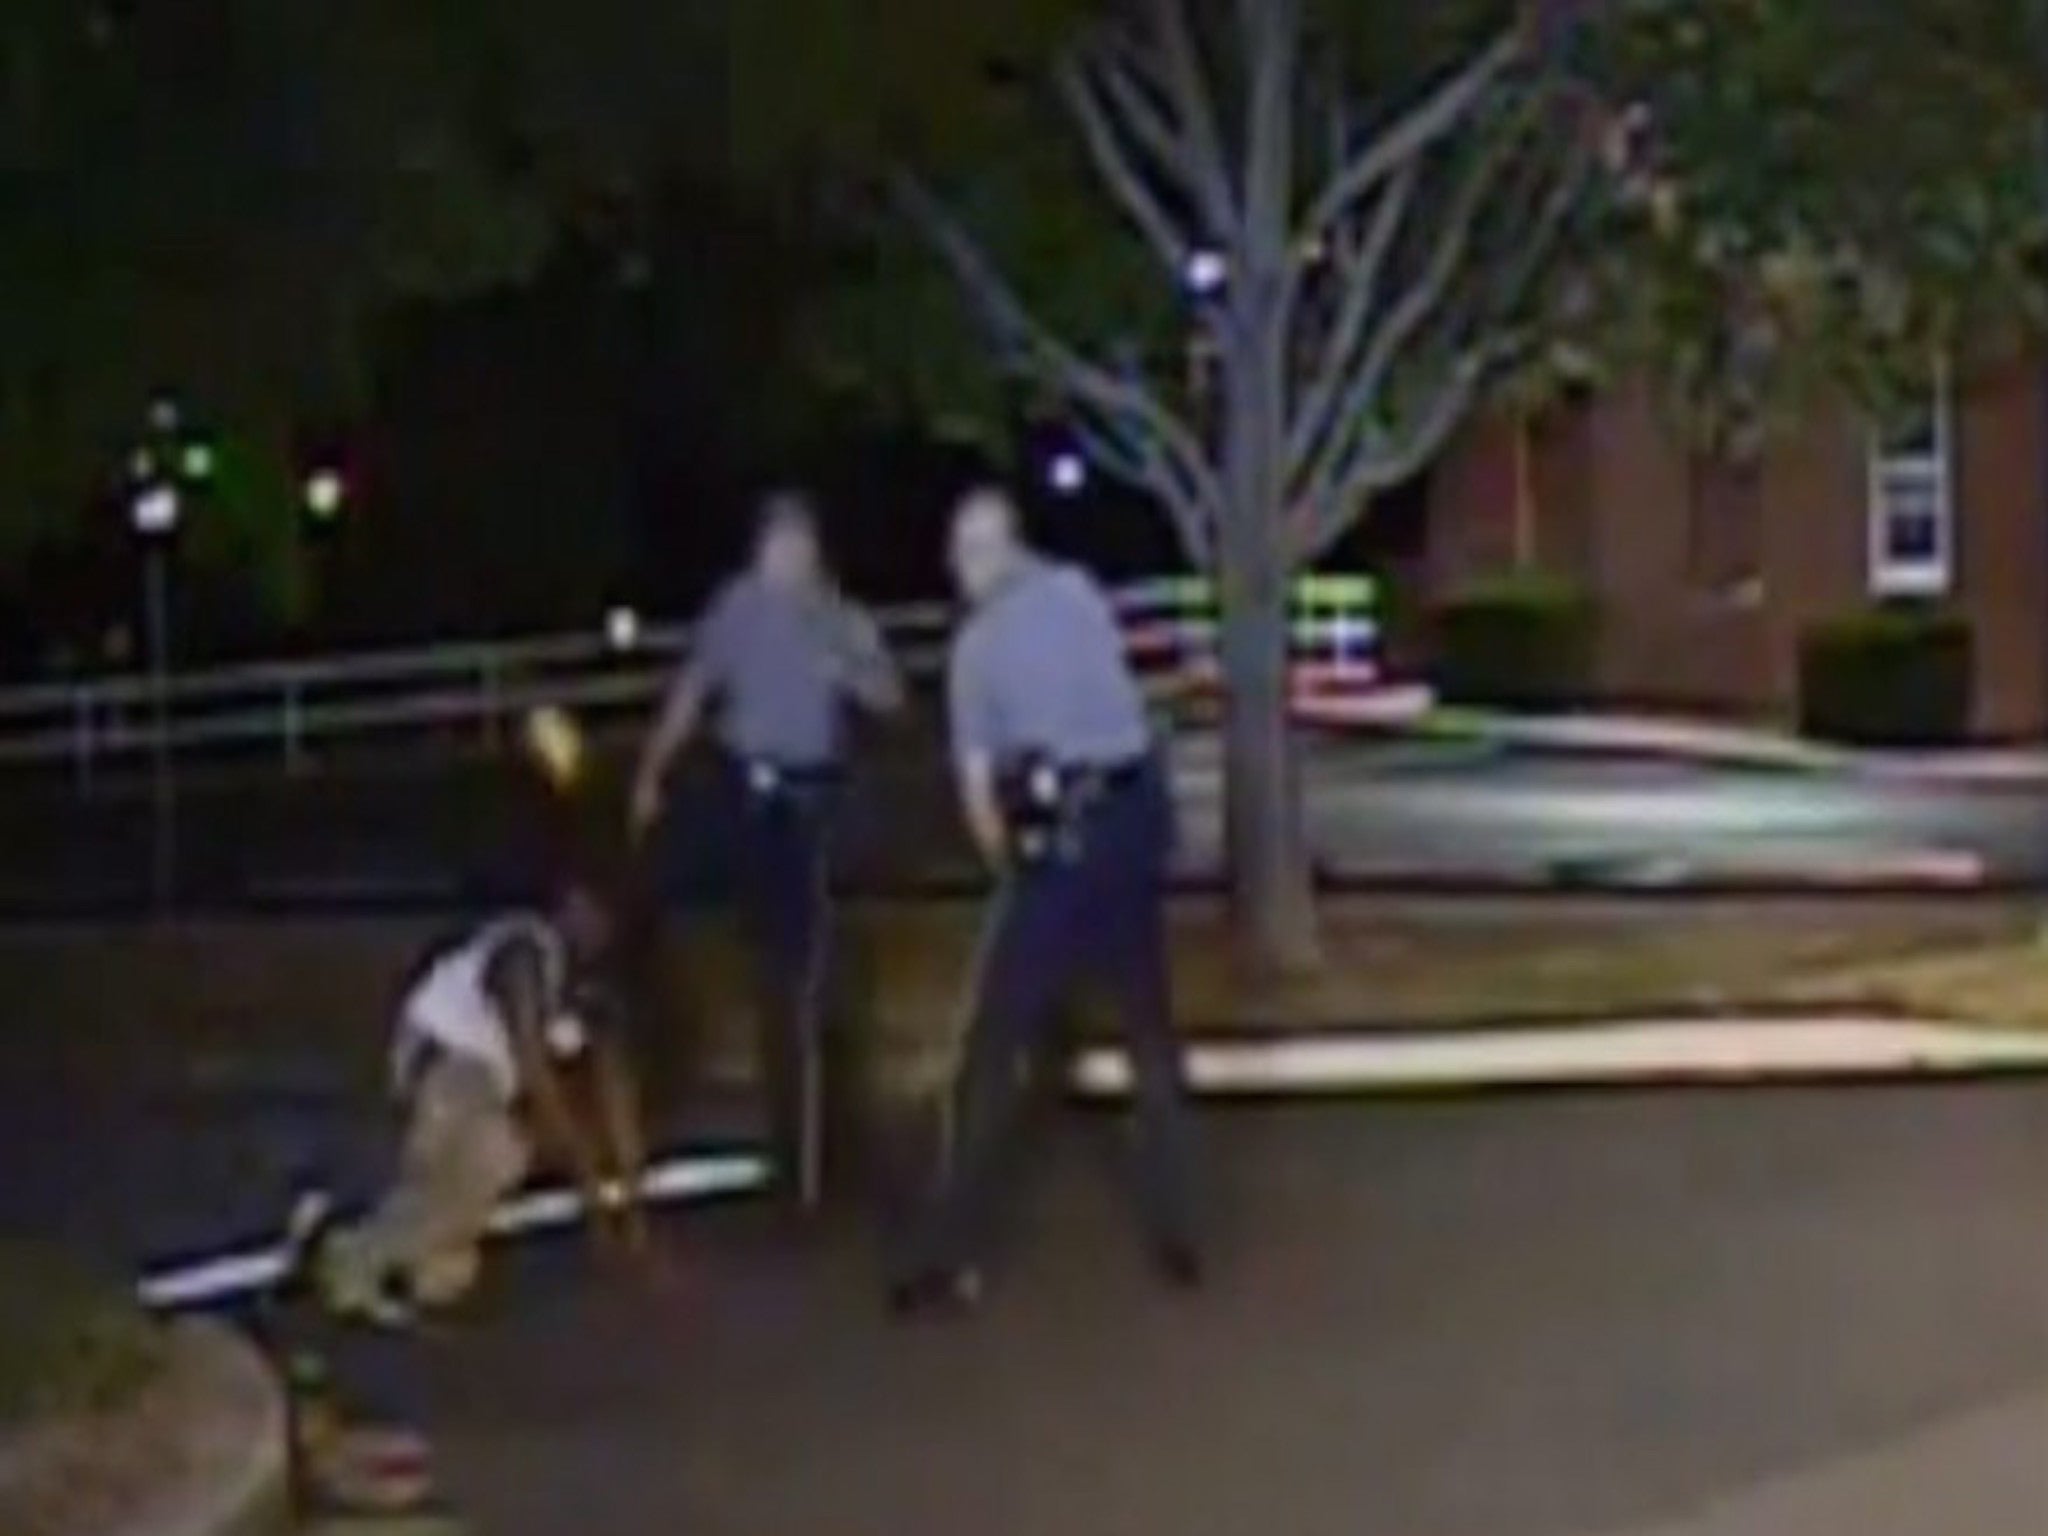 Dashcame footage shows a white officer kicking a black suspect in the teethe